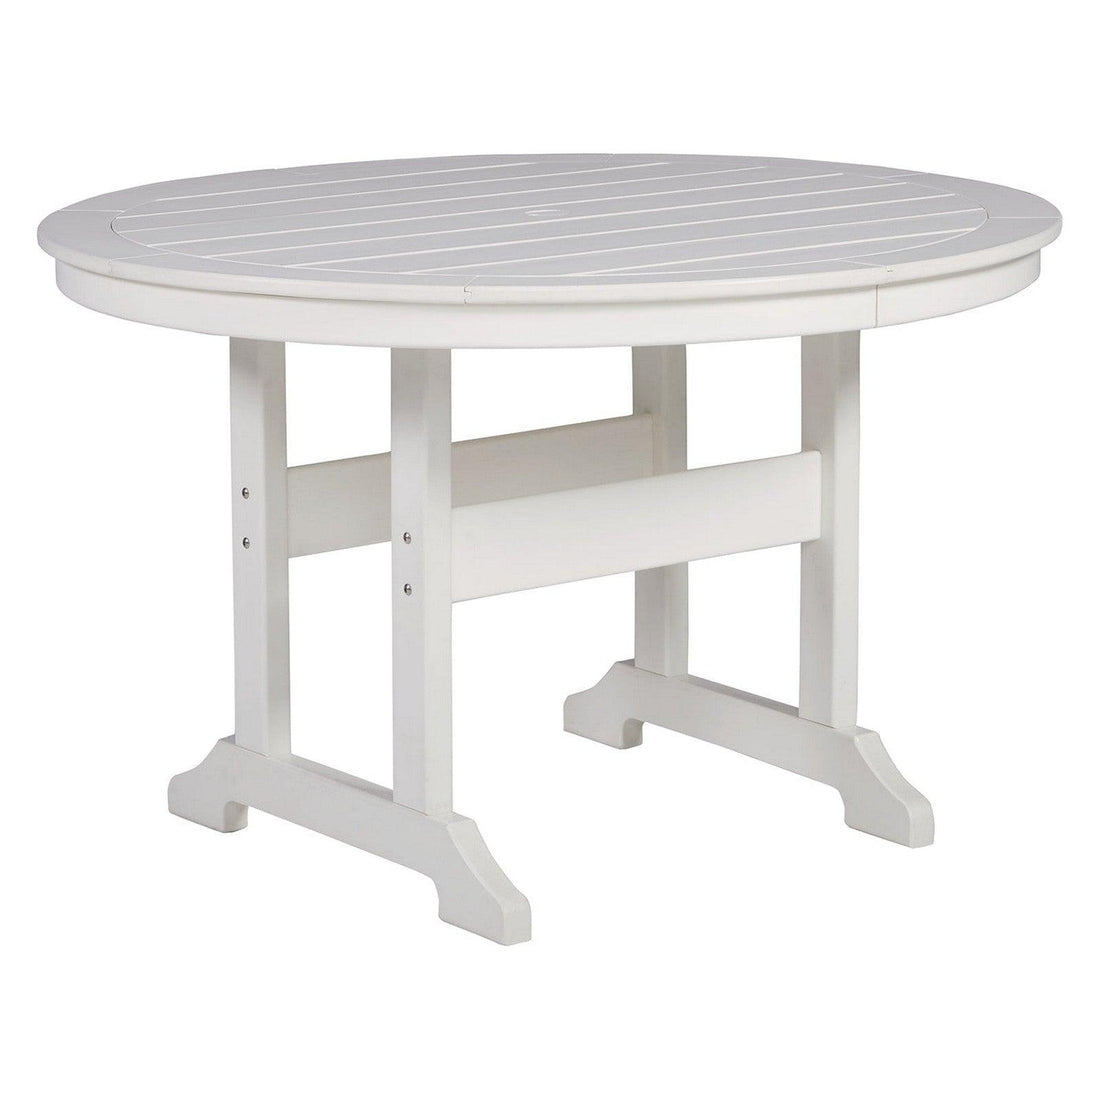 Crescent Luxe Outdoor Dining Table Ash-P207-615